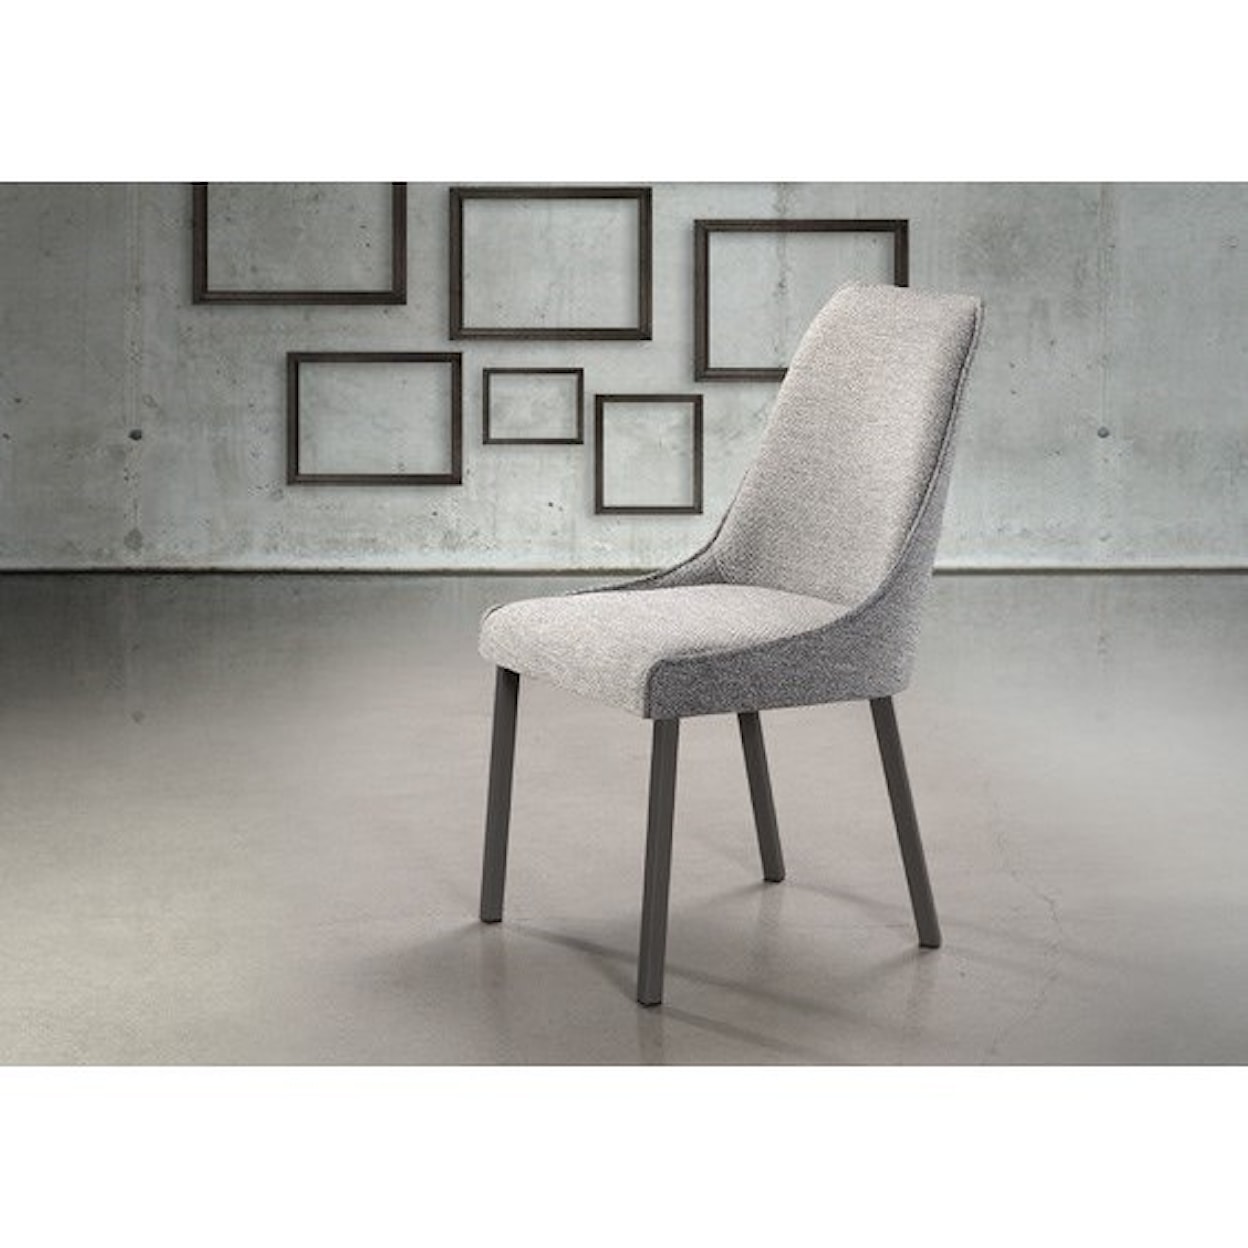 Trica Contemporary Seating Olivia Chair